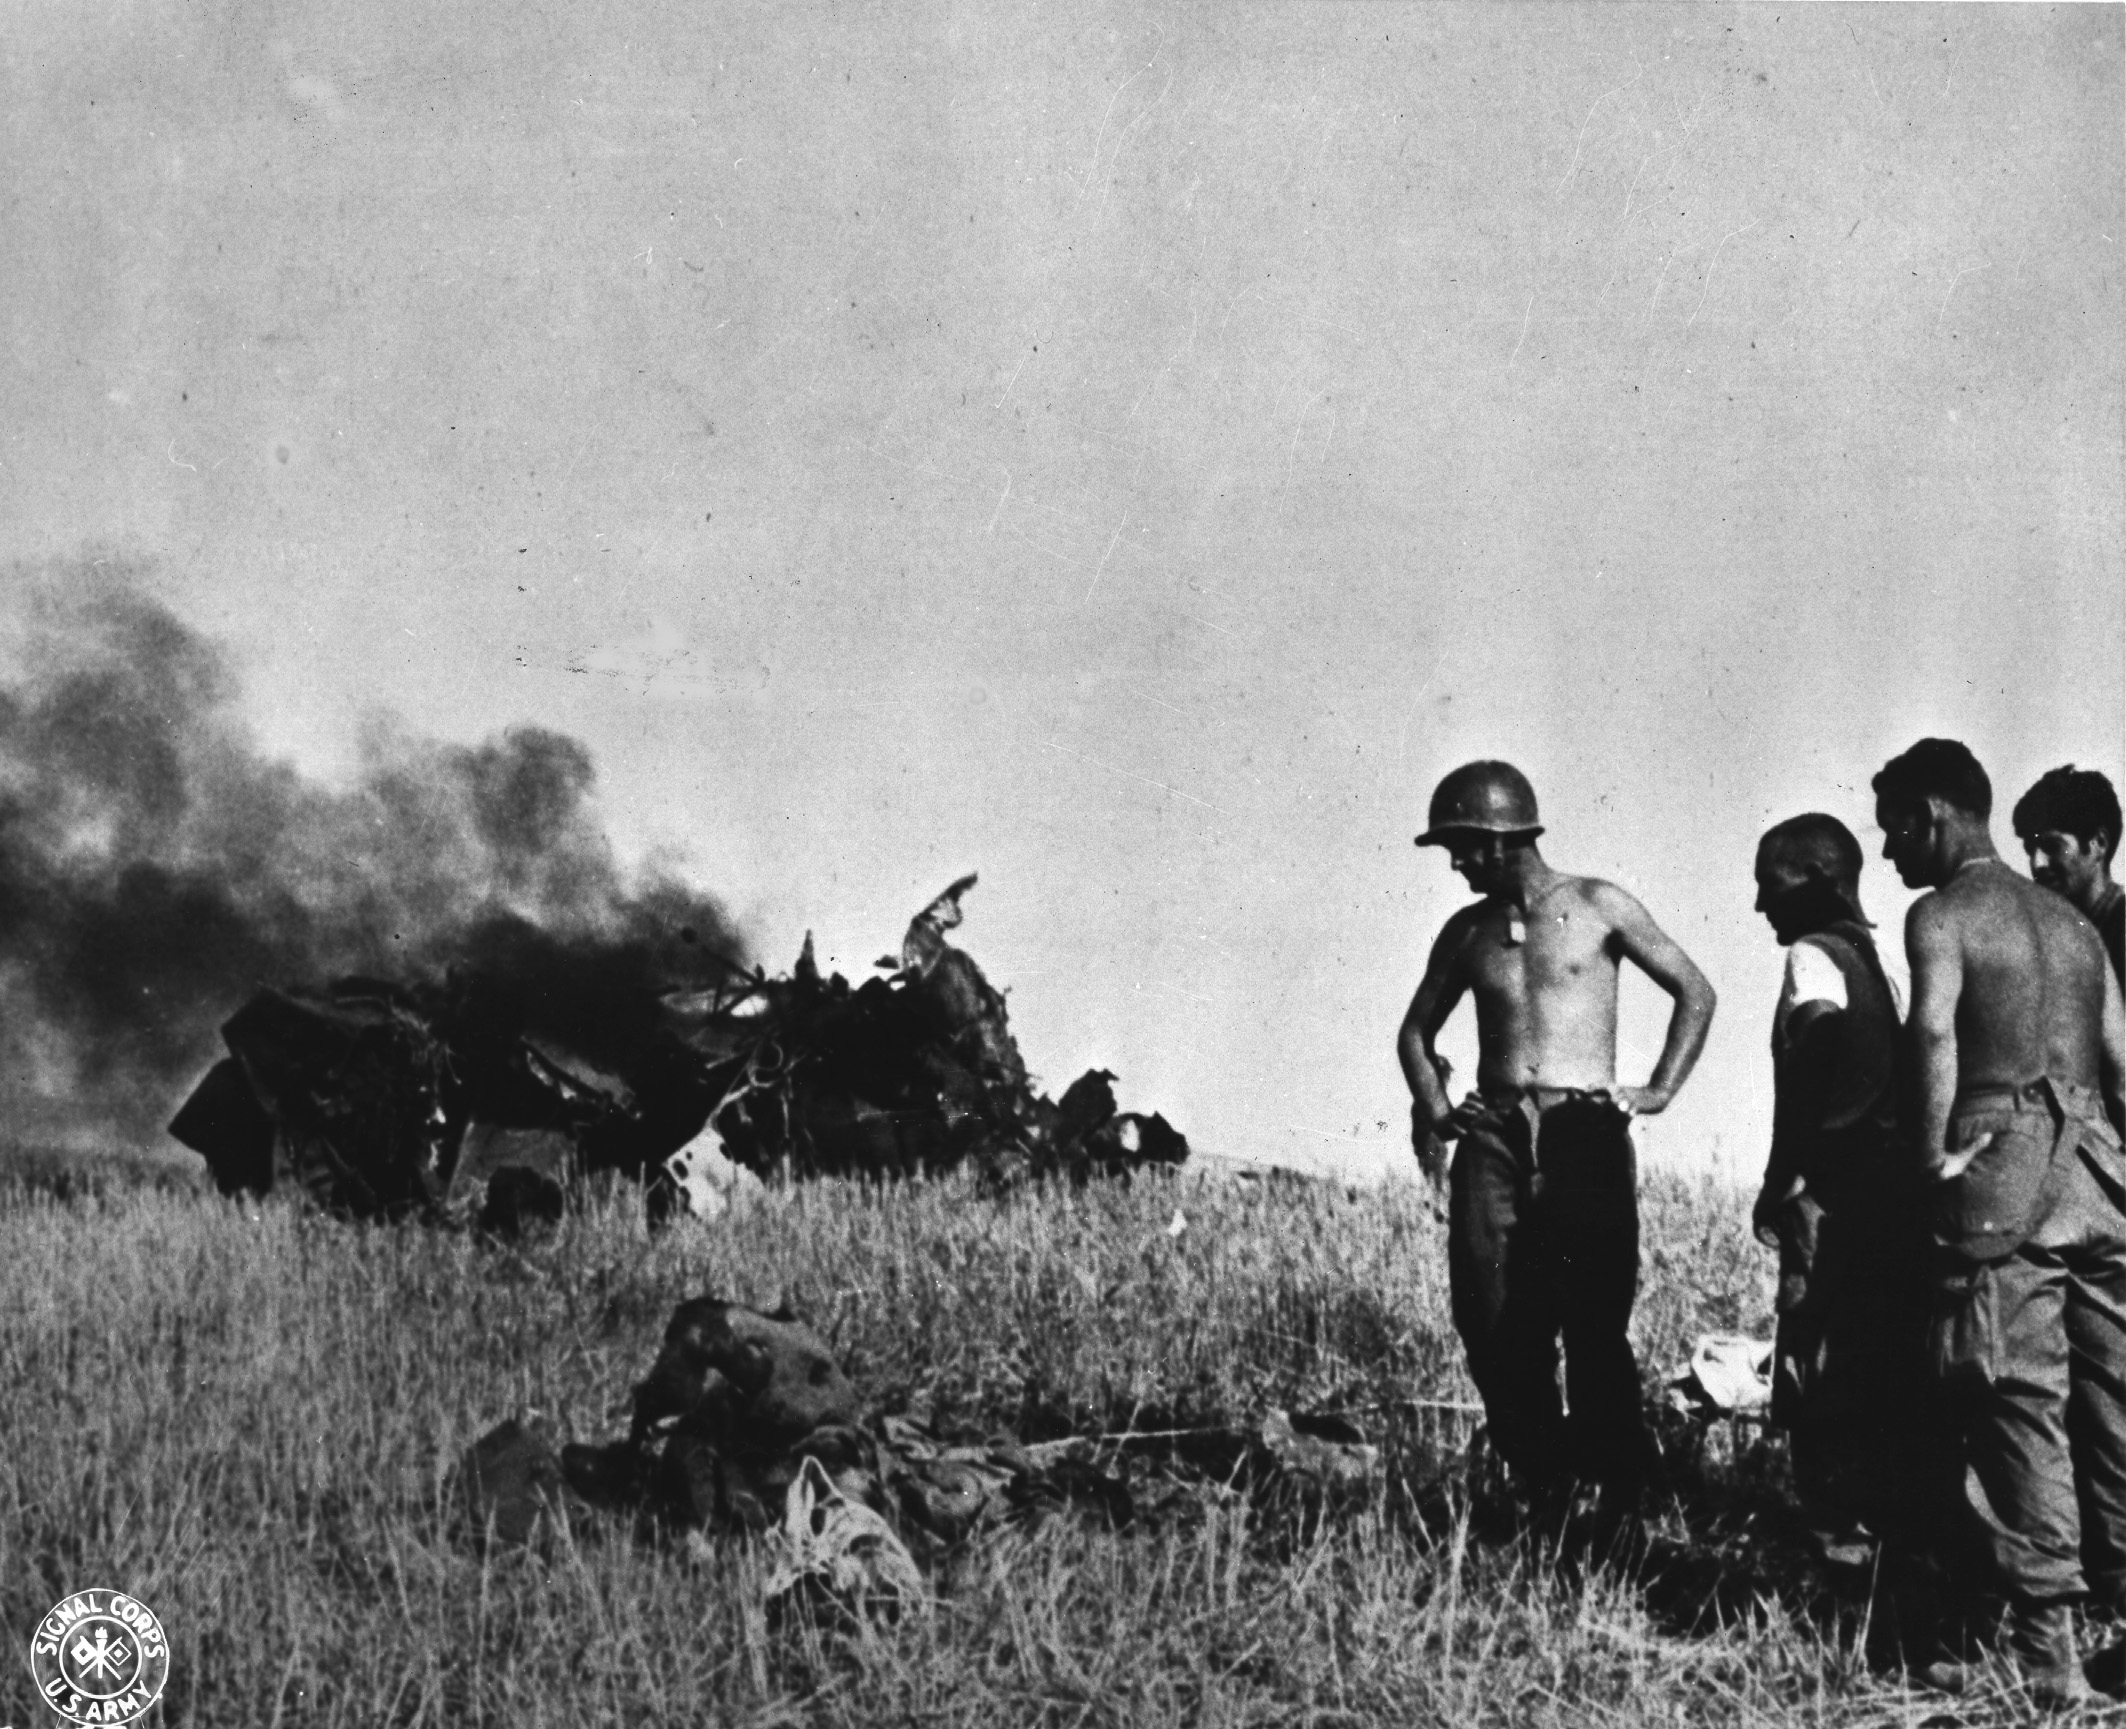 American soldiers looking at a dead German pilot and his wrecked aircraft near Gela, Sicily, Italy, 12 Jul 1943